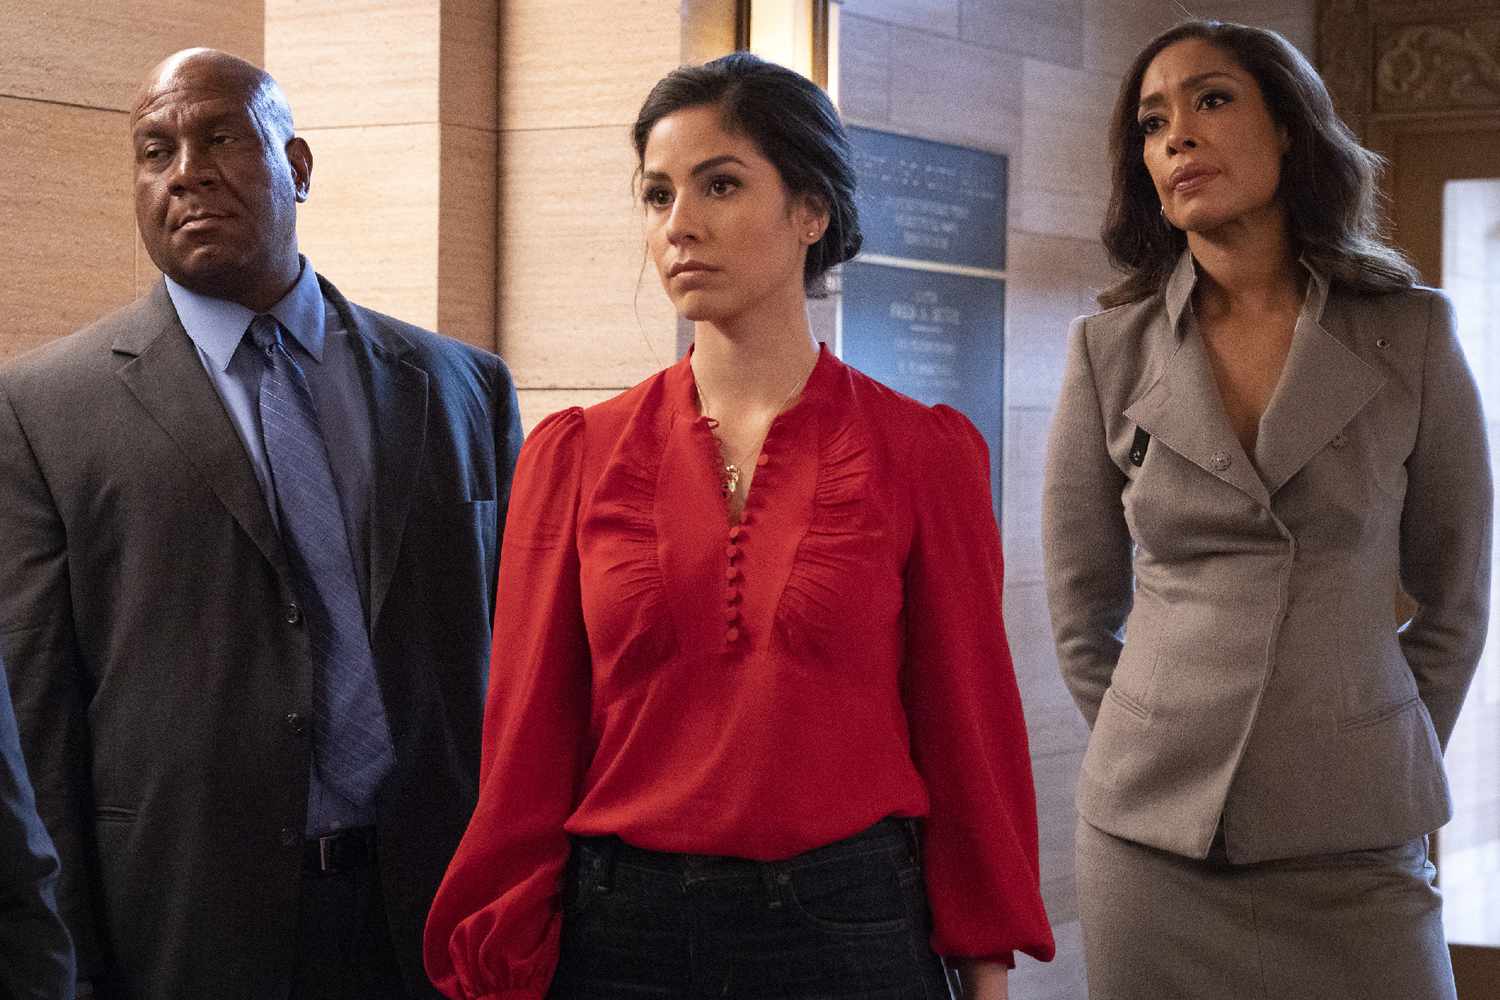 New Twist in Legal Drama 'Suits' Spinoff Show Introduces Erica, a Fresh Face in L.A.'s Courtrooms